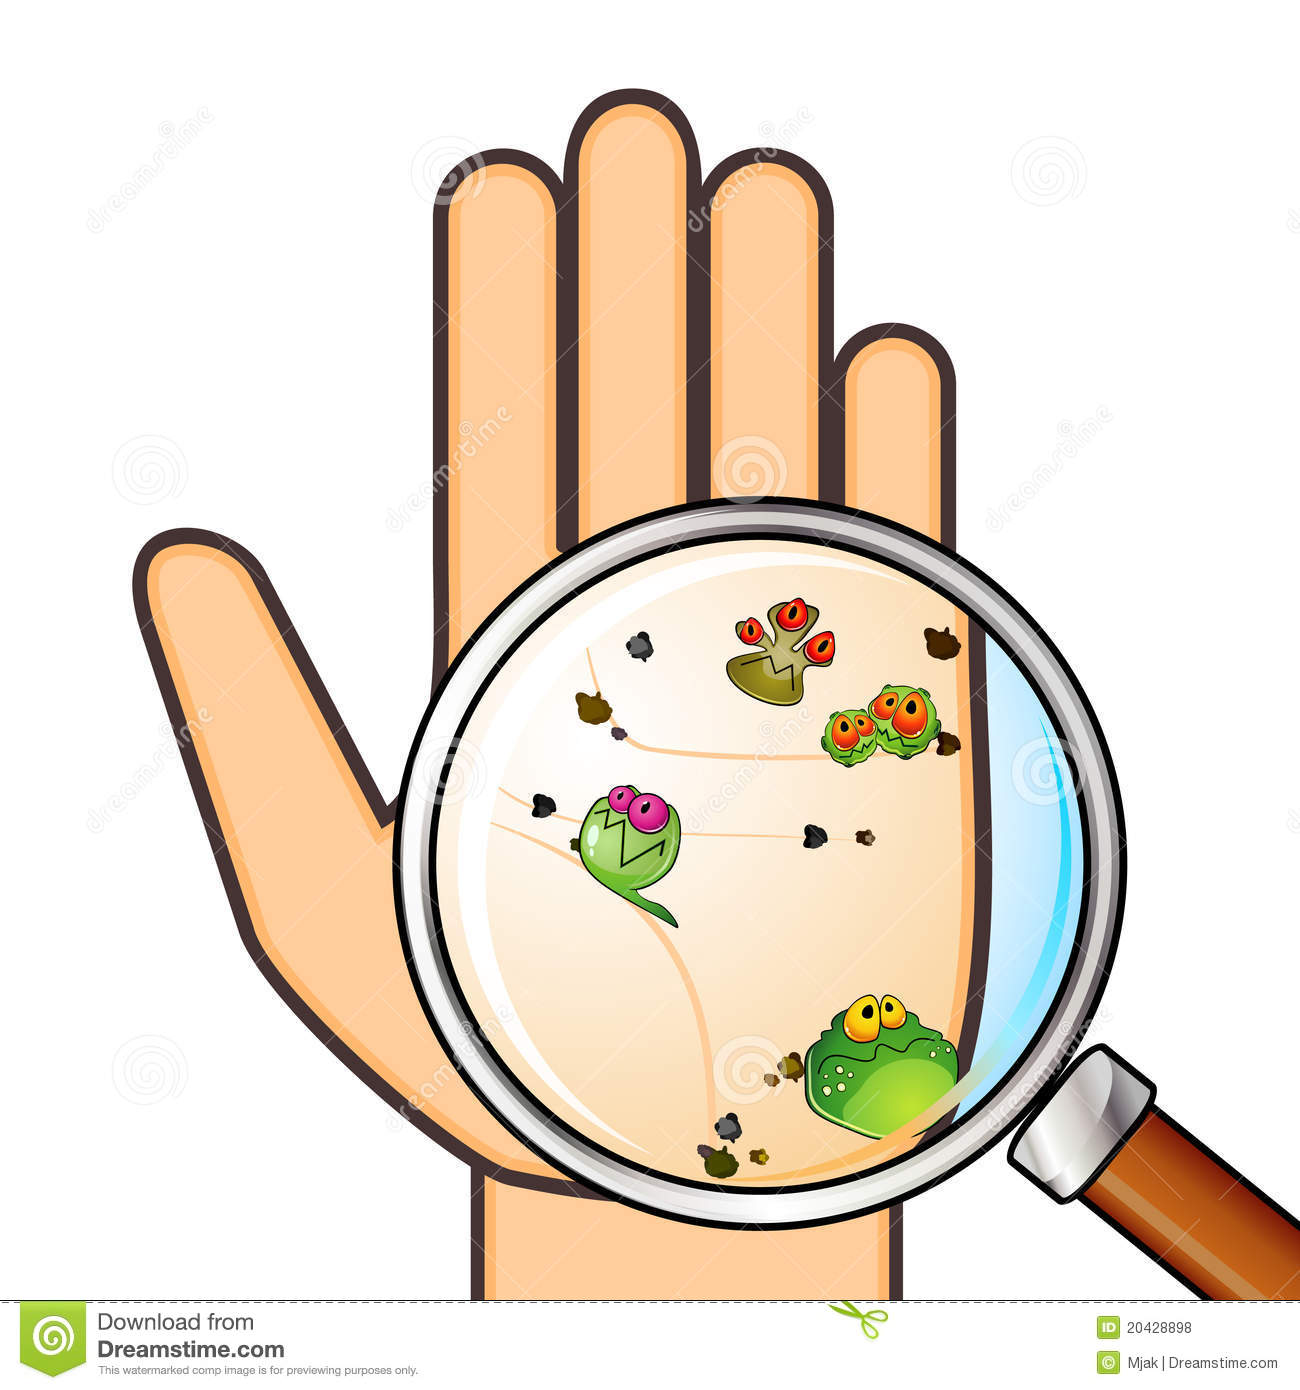 Palm With Germs And Trash Across Magnifying Glass Mr No Pr No 3 2991 8